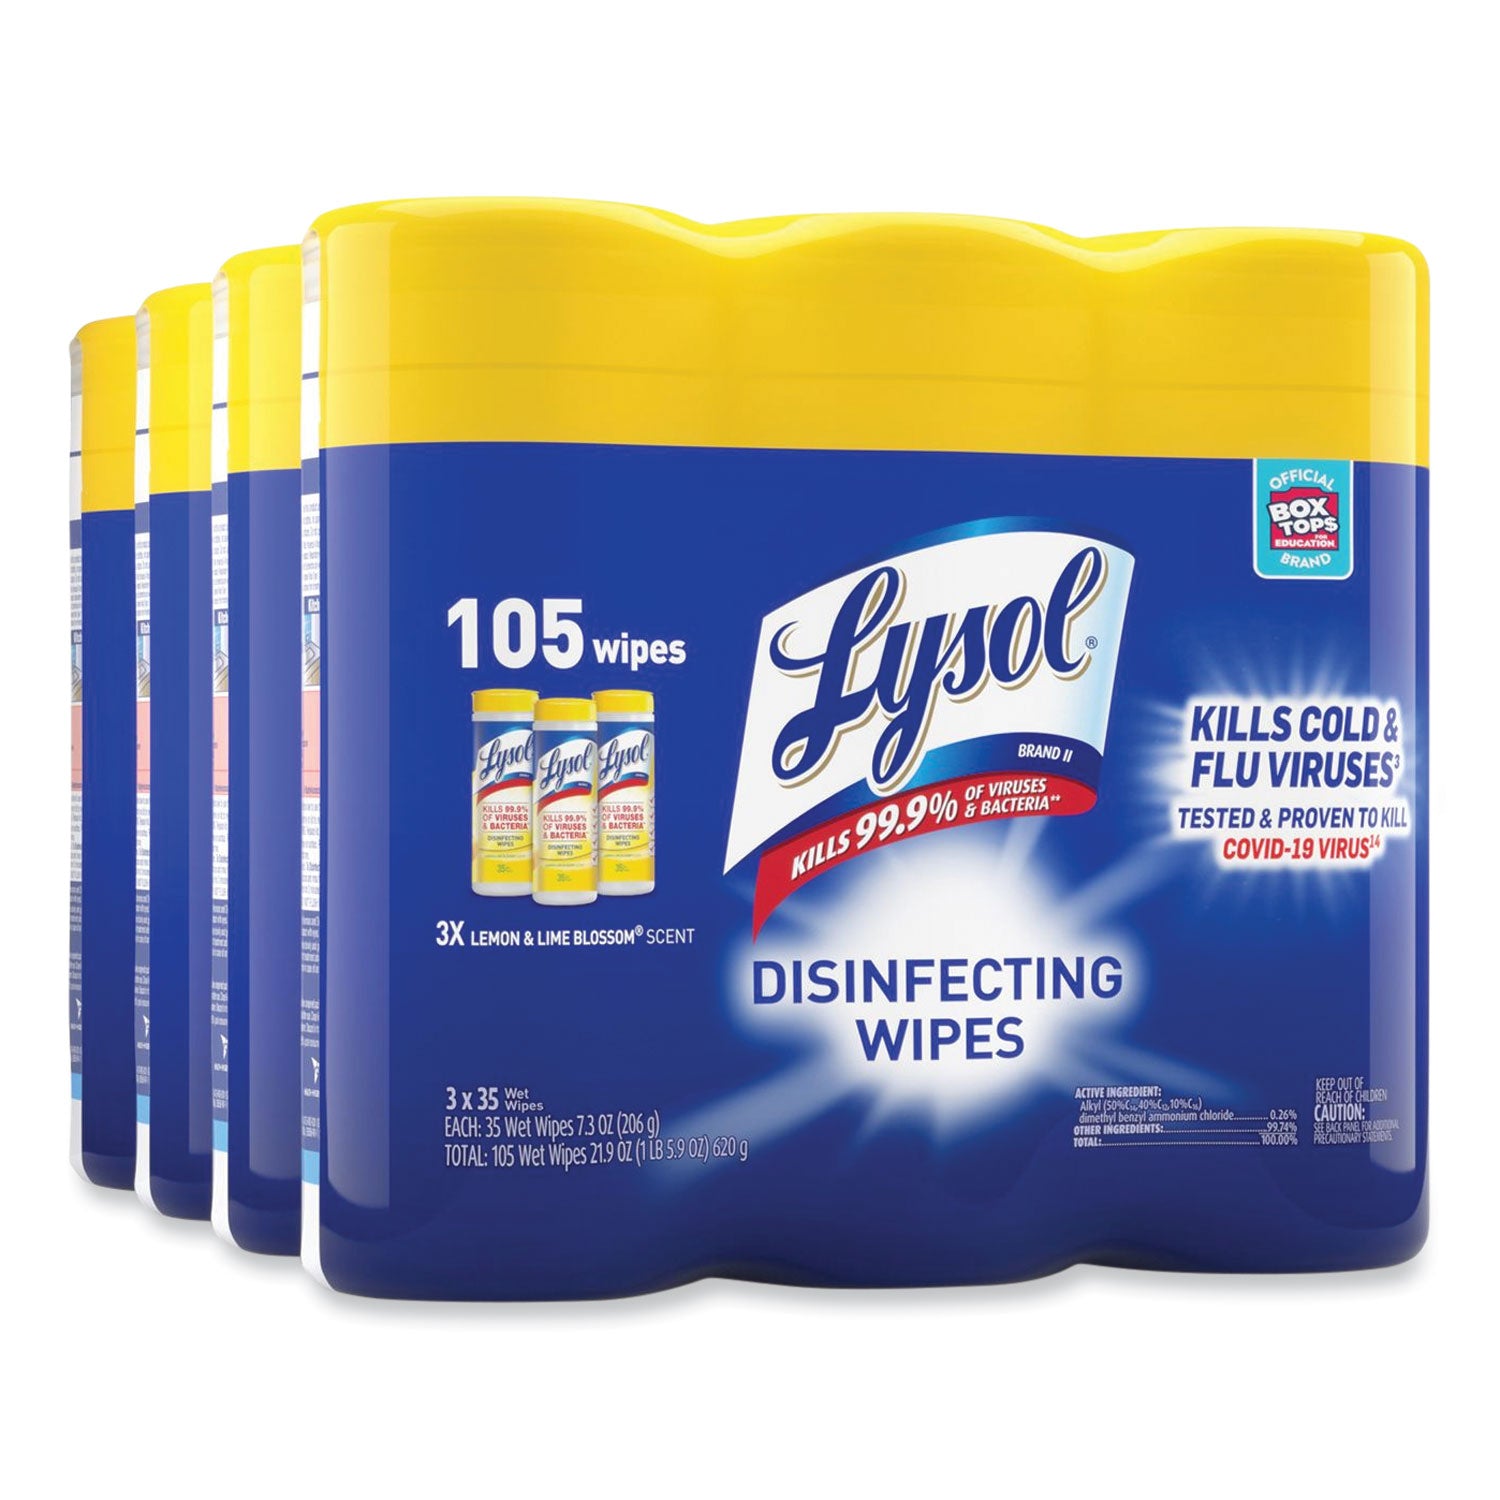 disinfecting-wipes-1-ply-7-x-725-lemon-and-lime-blossom-white-35-wipes-canister-3-canisters-pack_rac82159pk - 2